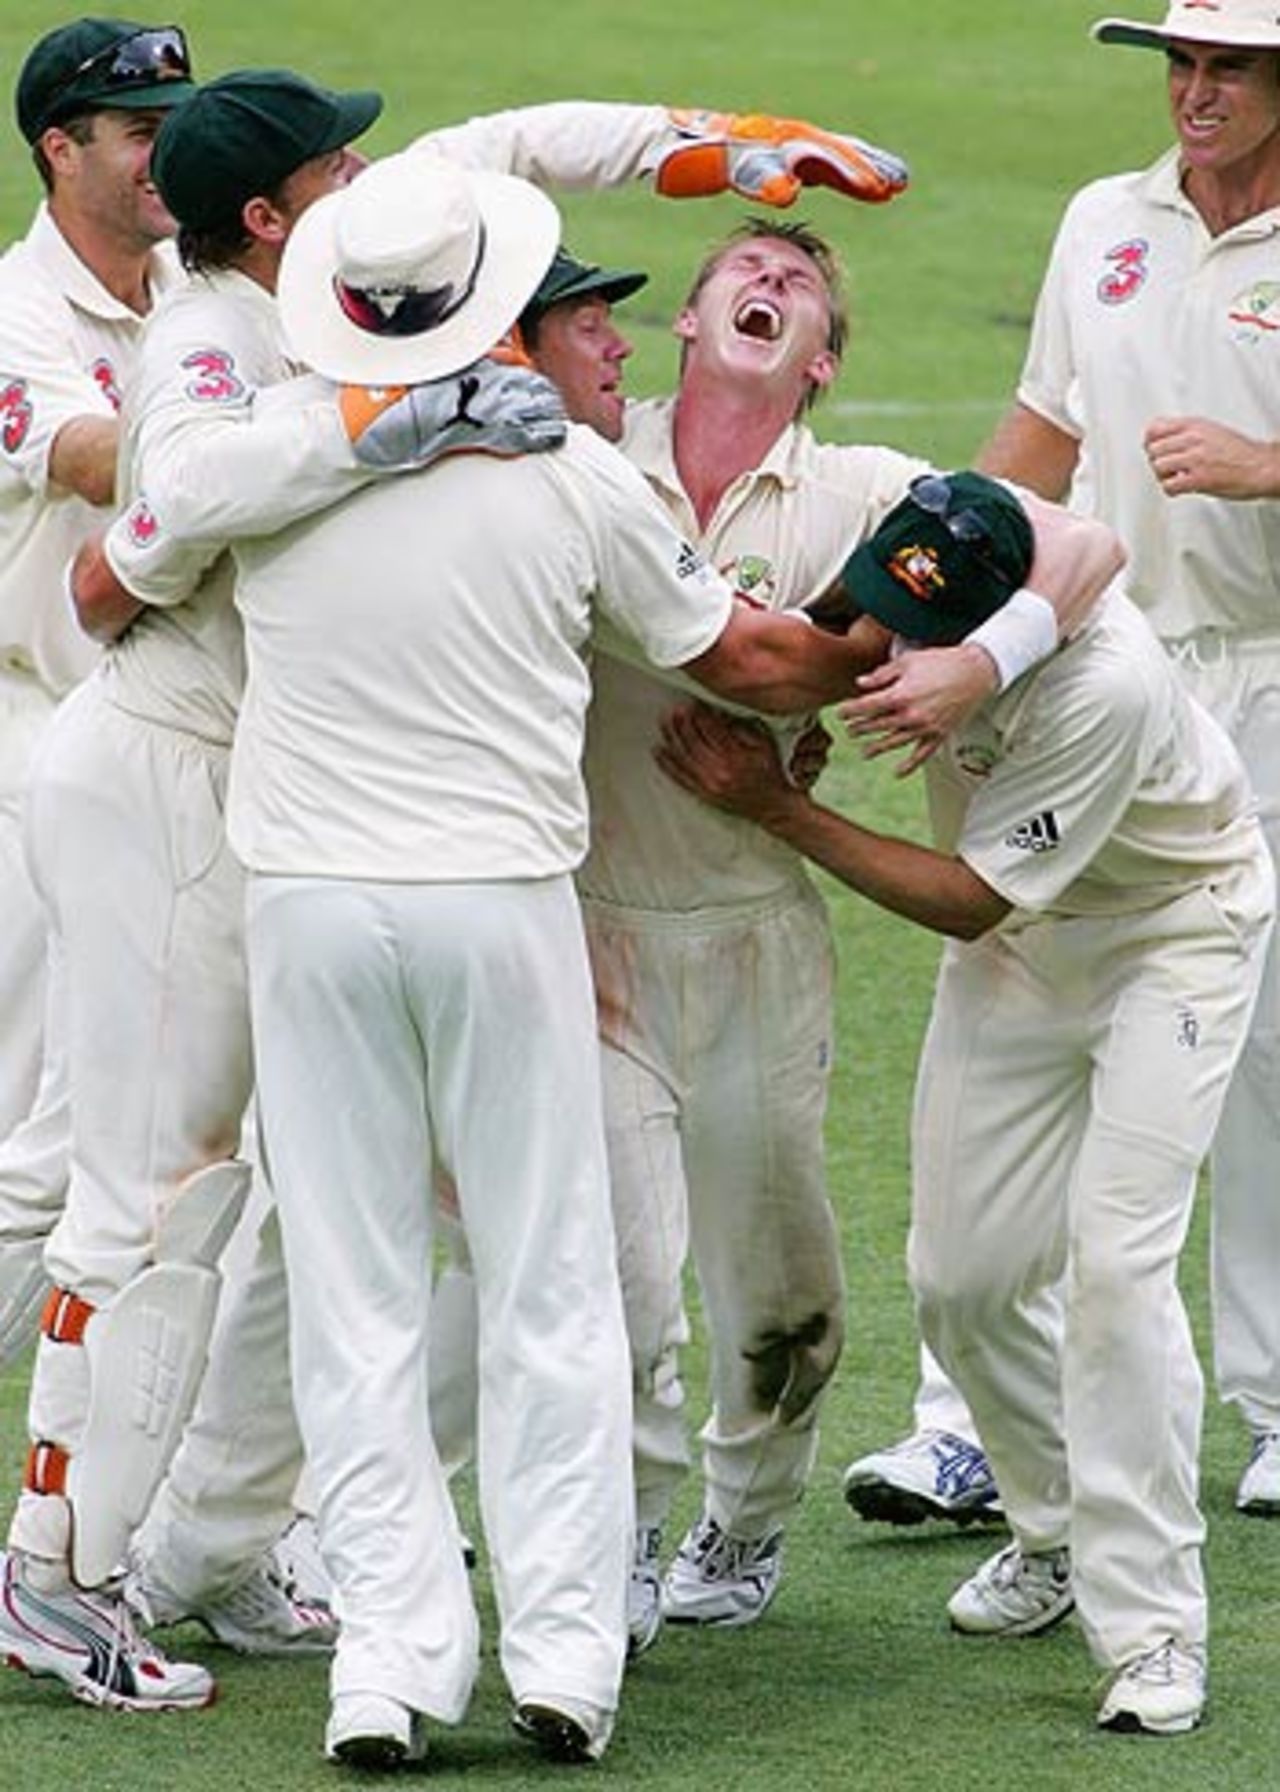 Brett Lee is mobbed after taking the final West indian wicket, 1st Test, Brisbane, 4th day, November 5, 2005